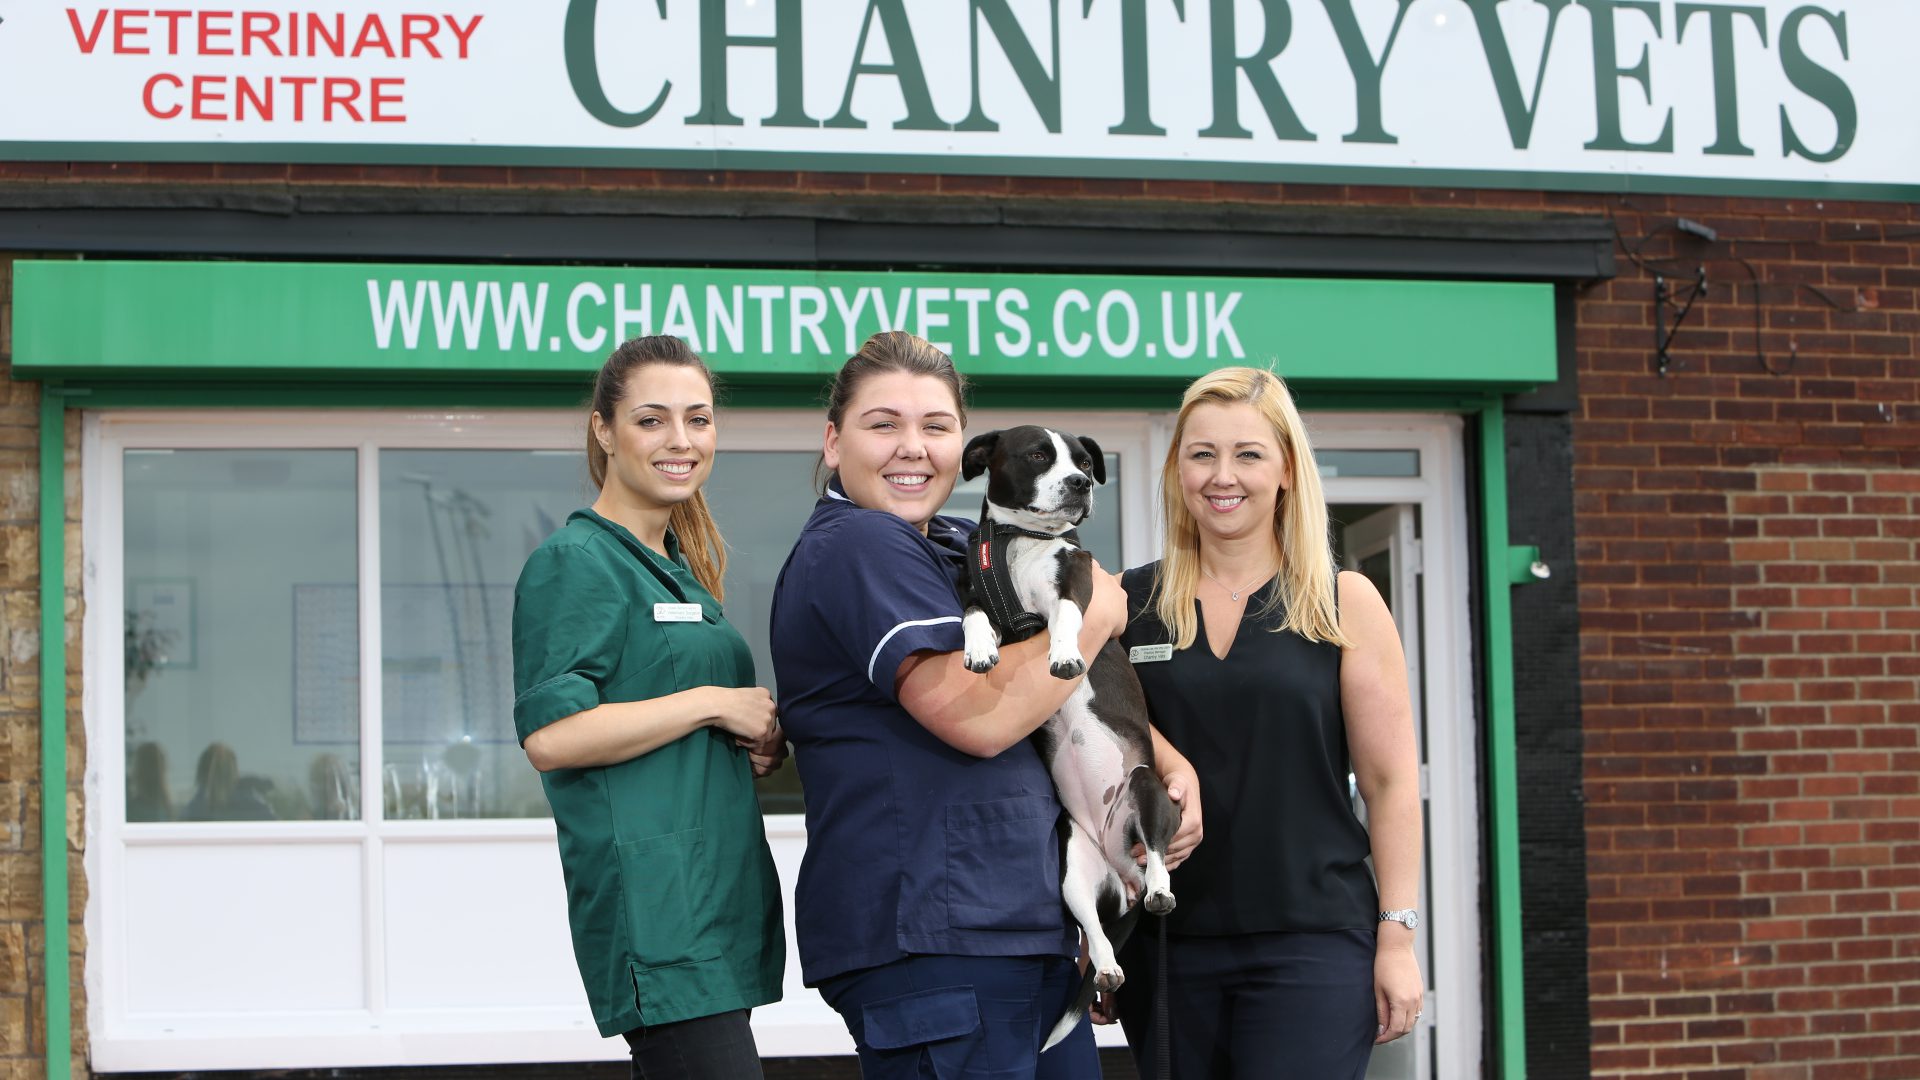 Boost for pet owners as veterinary practice expands after £300k investment